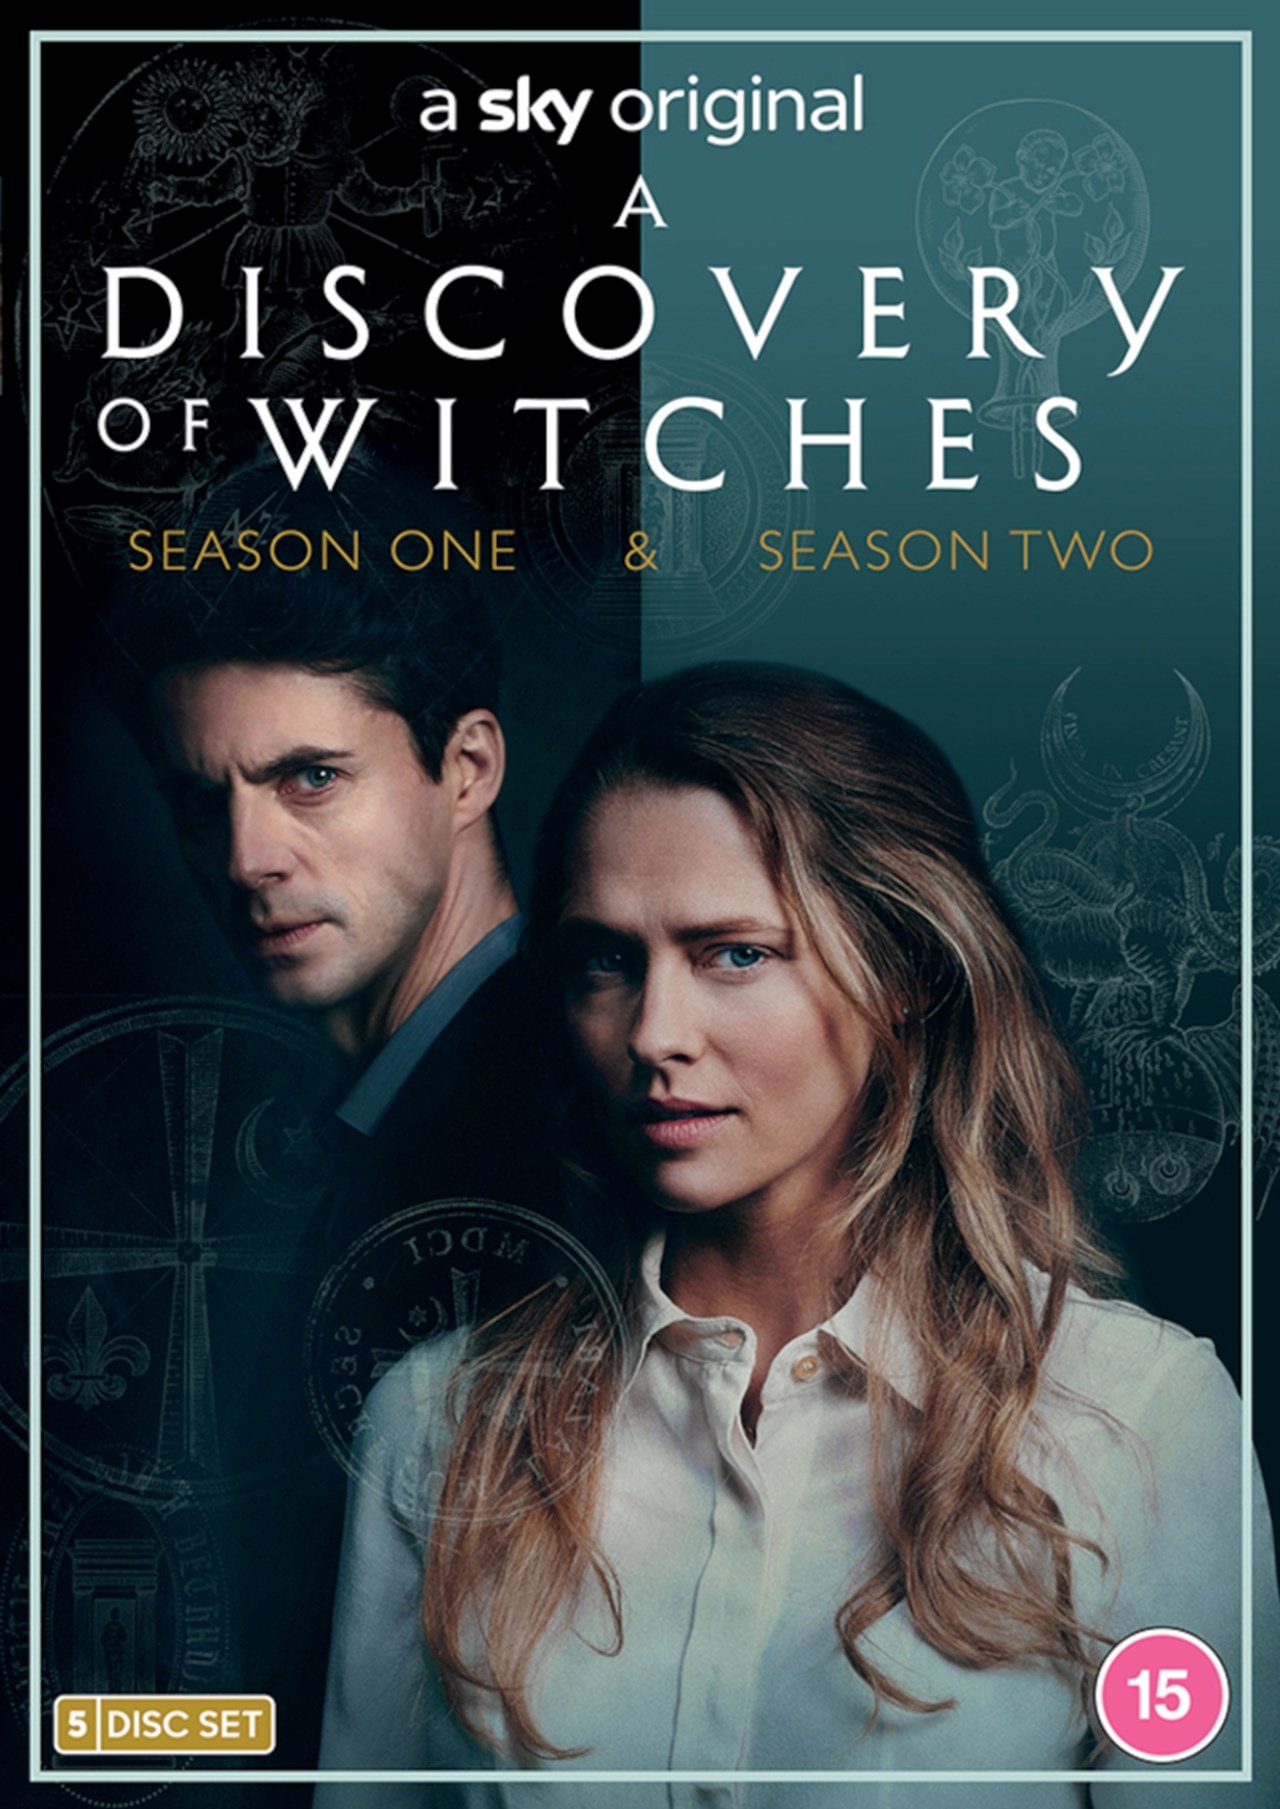 A Discovery of Witches: Seasons 1 & 2 | DVD Box Set | Free shipping ...